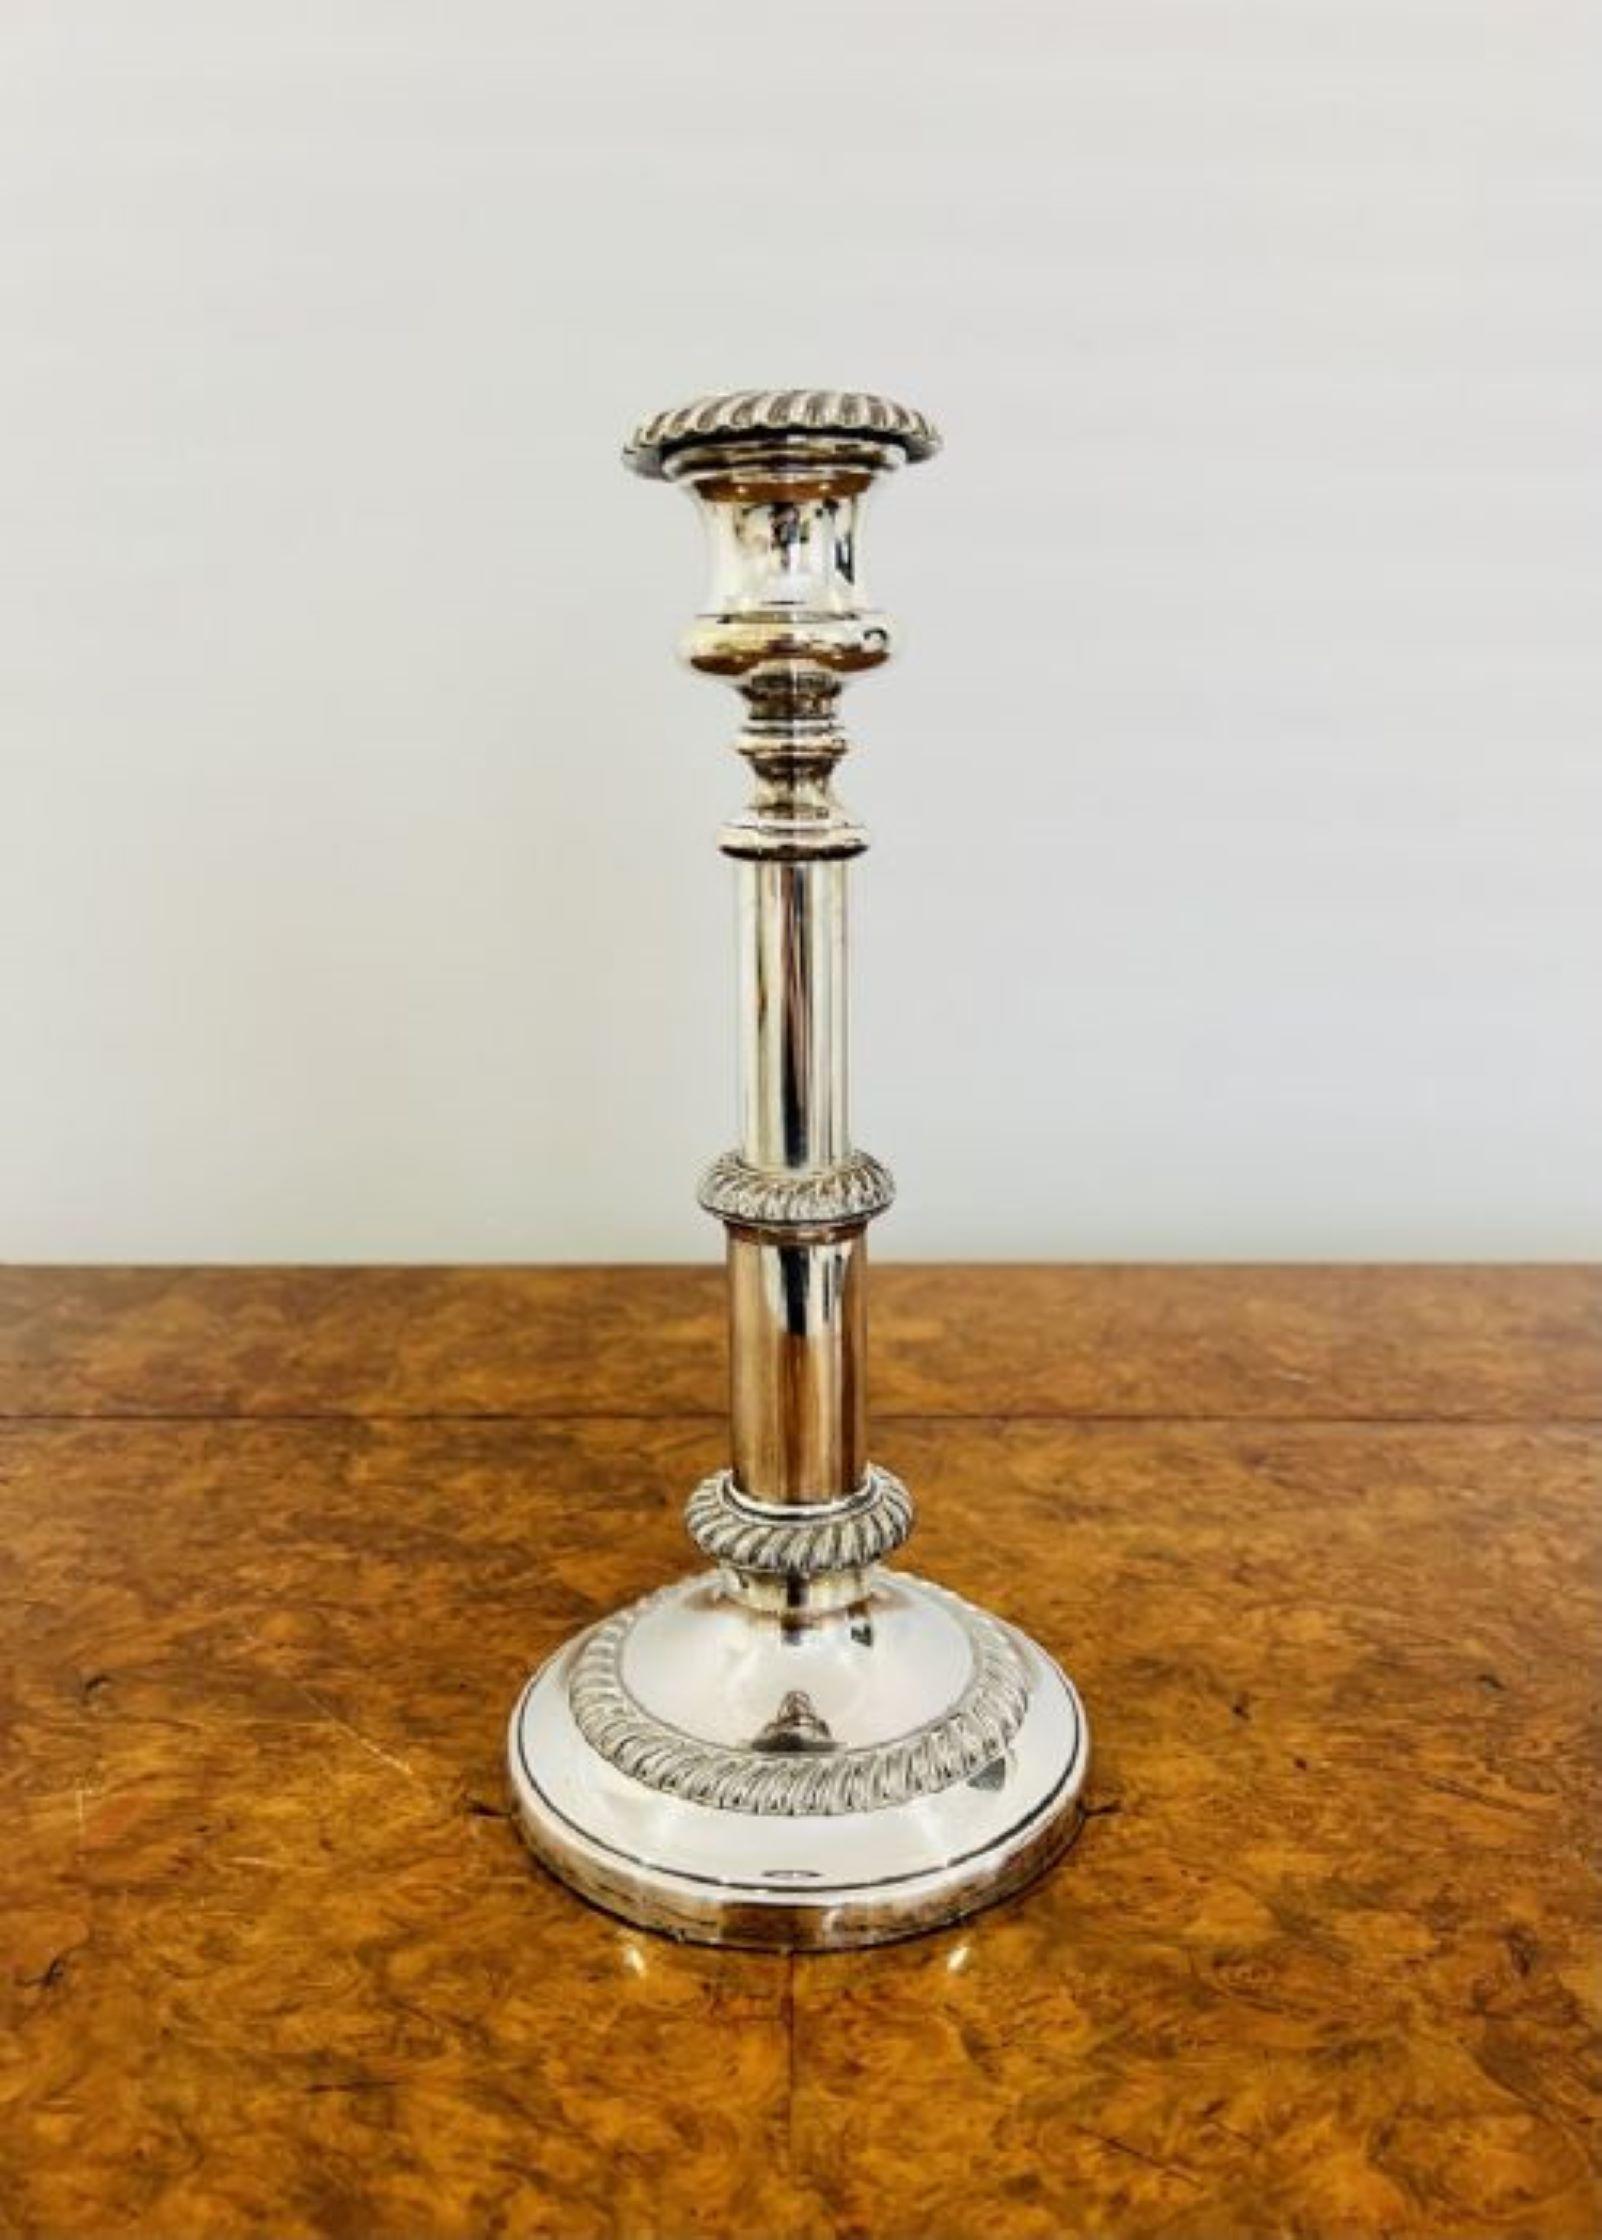 Sheffield Plate Quality pair of antique Regency telescopic Sheffield plated candlesticks 